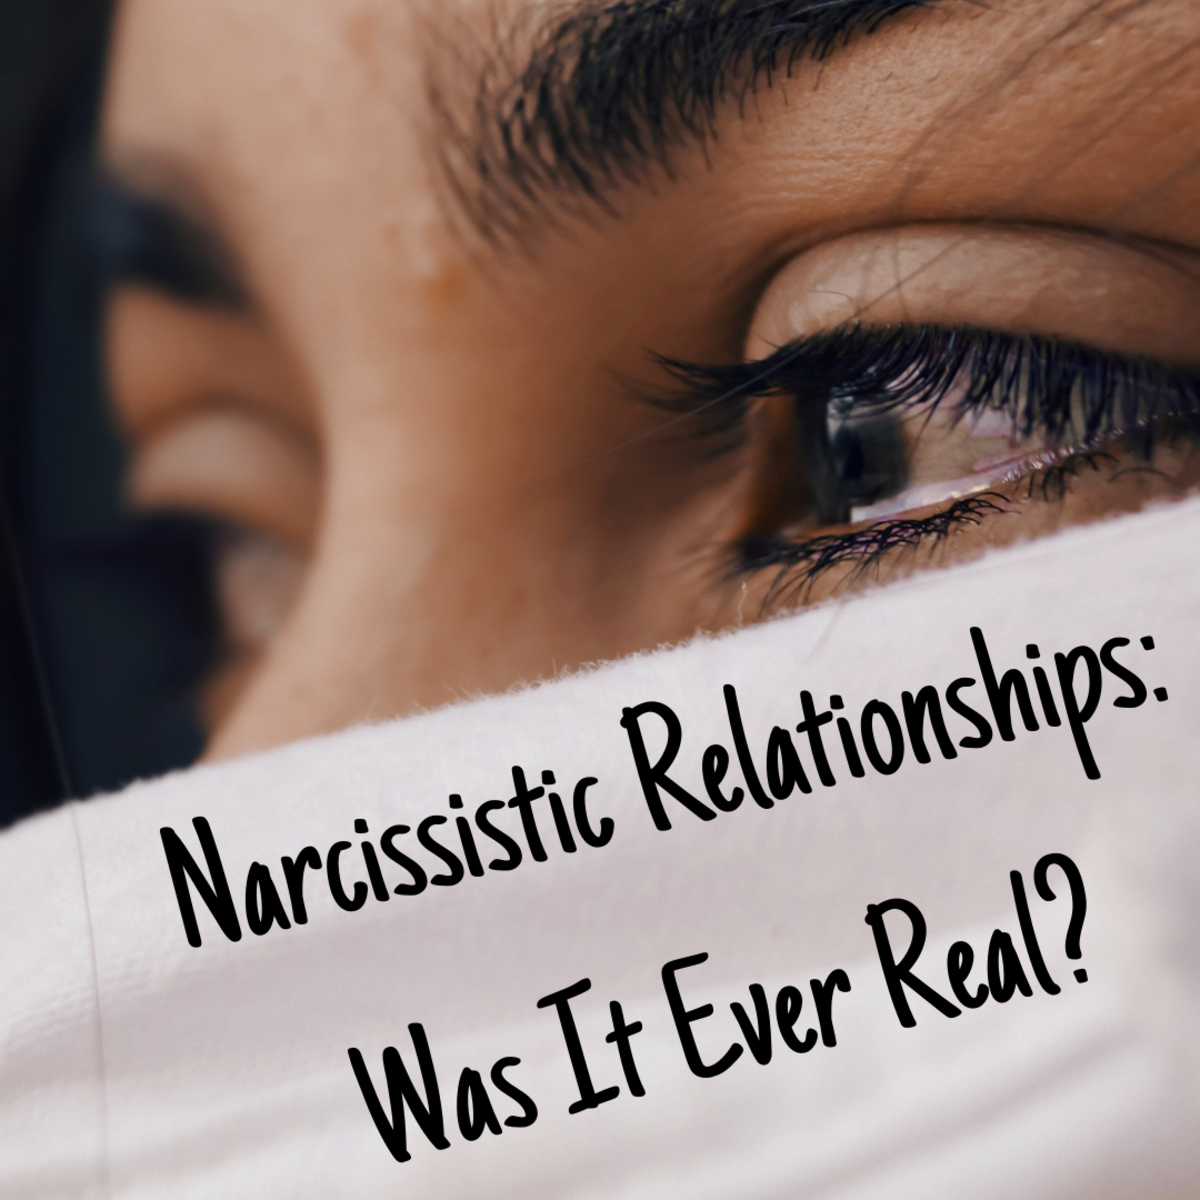 Narcissistic Relationships: Was It Ever Real?